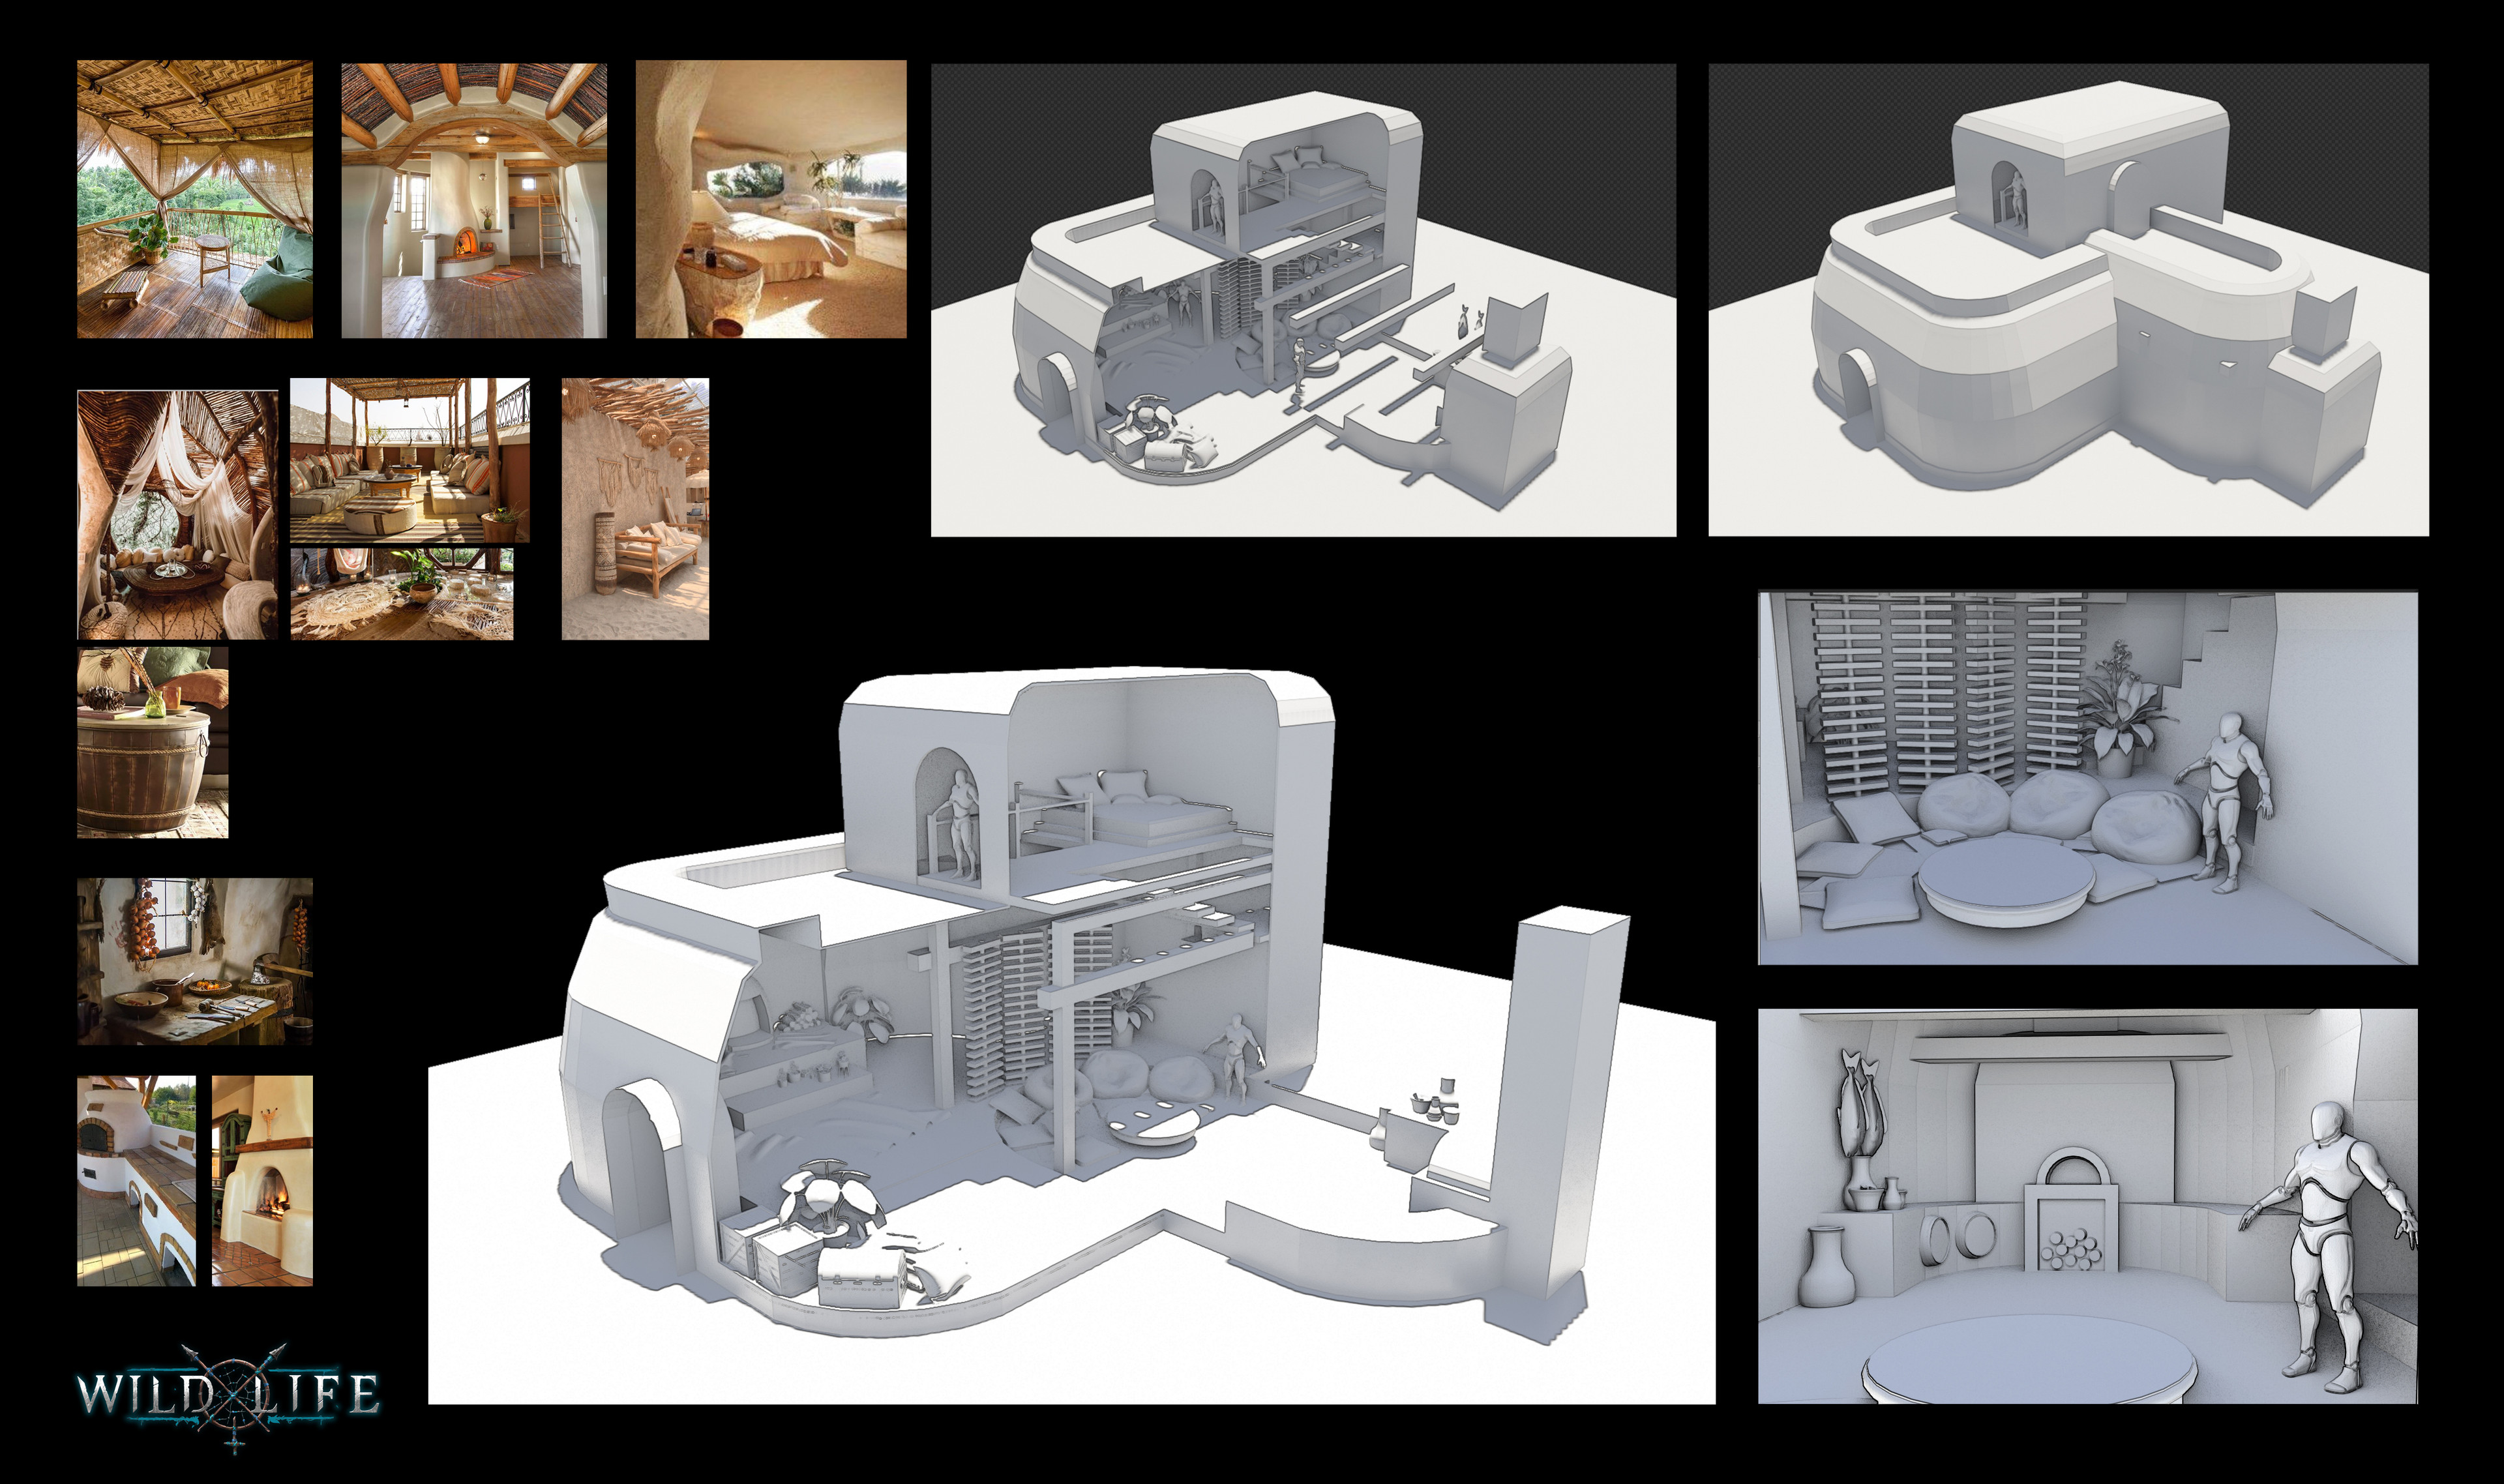 Second draft concept ideas for interiors